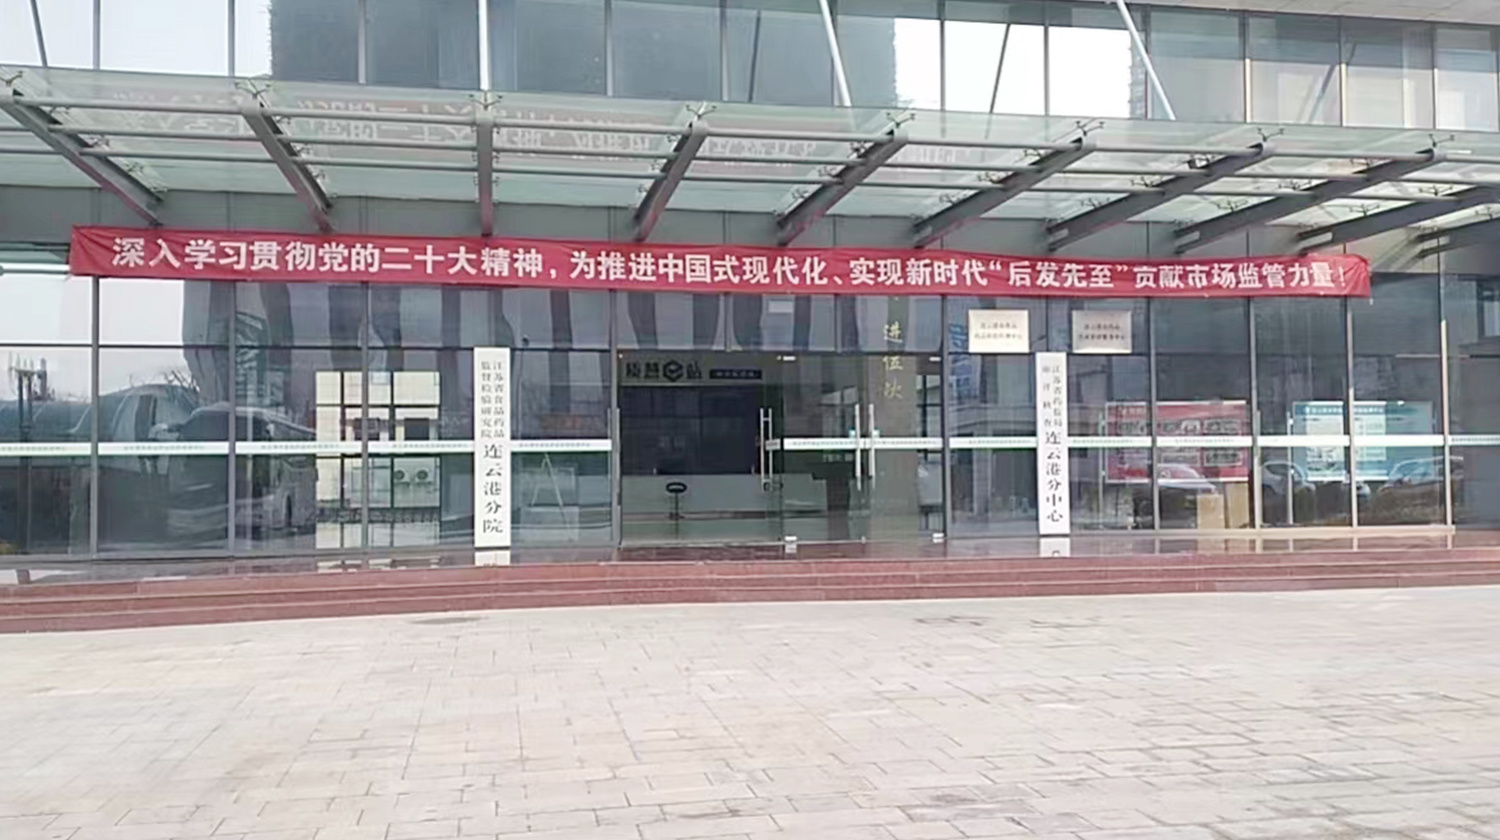 Lianyungang City quality technology comprehensive inspection and testing center